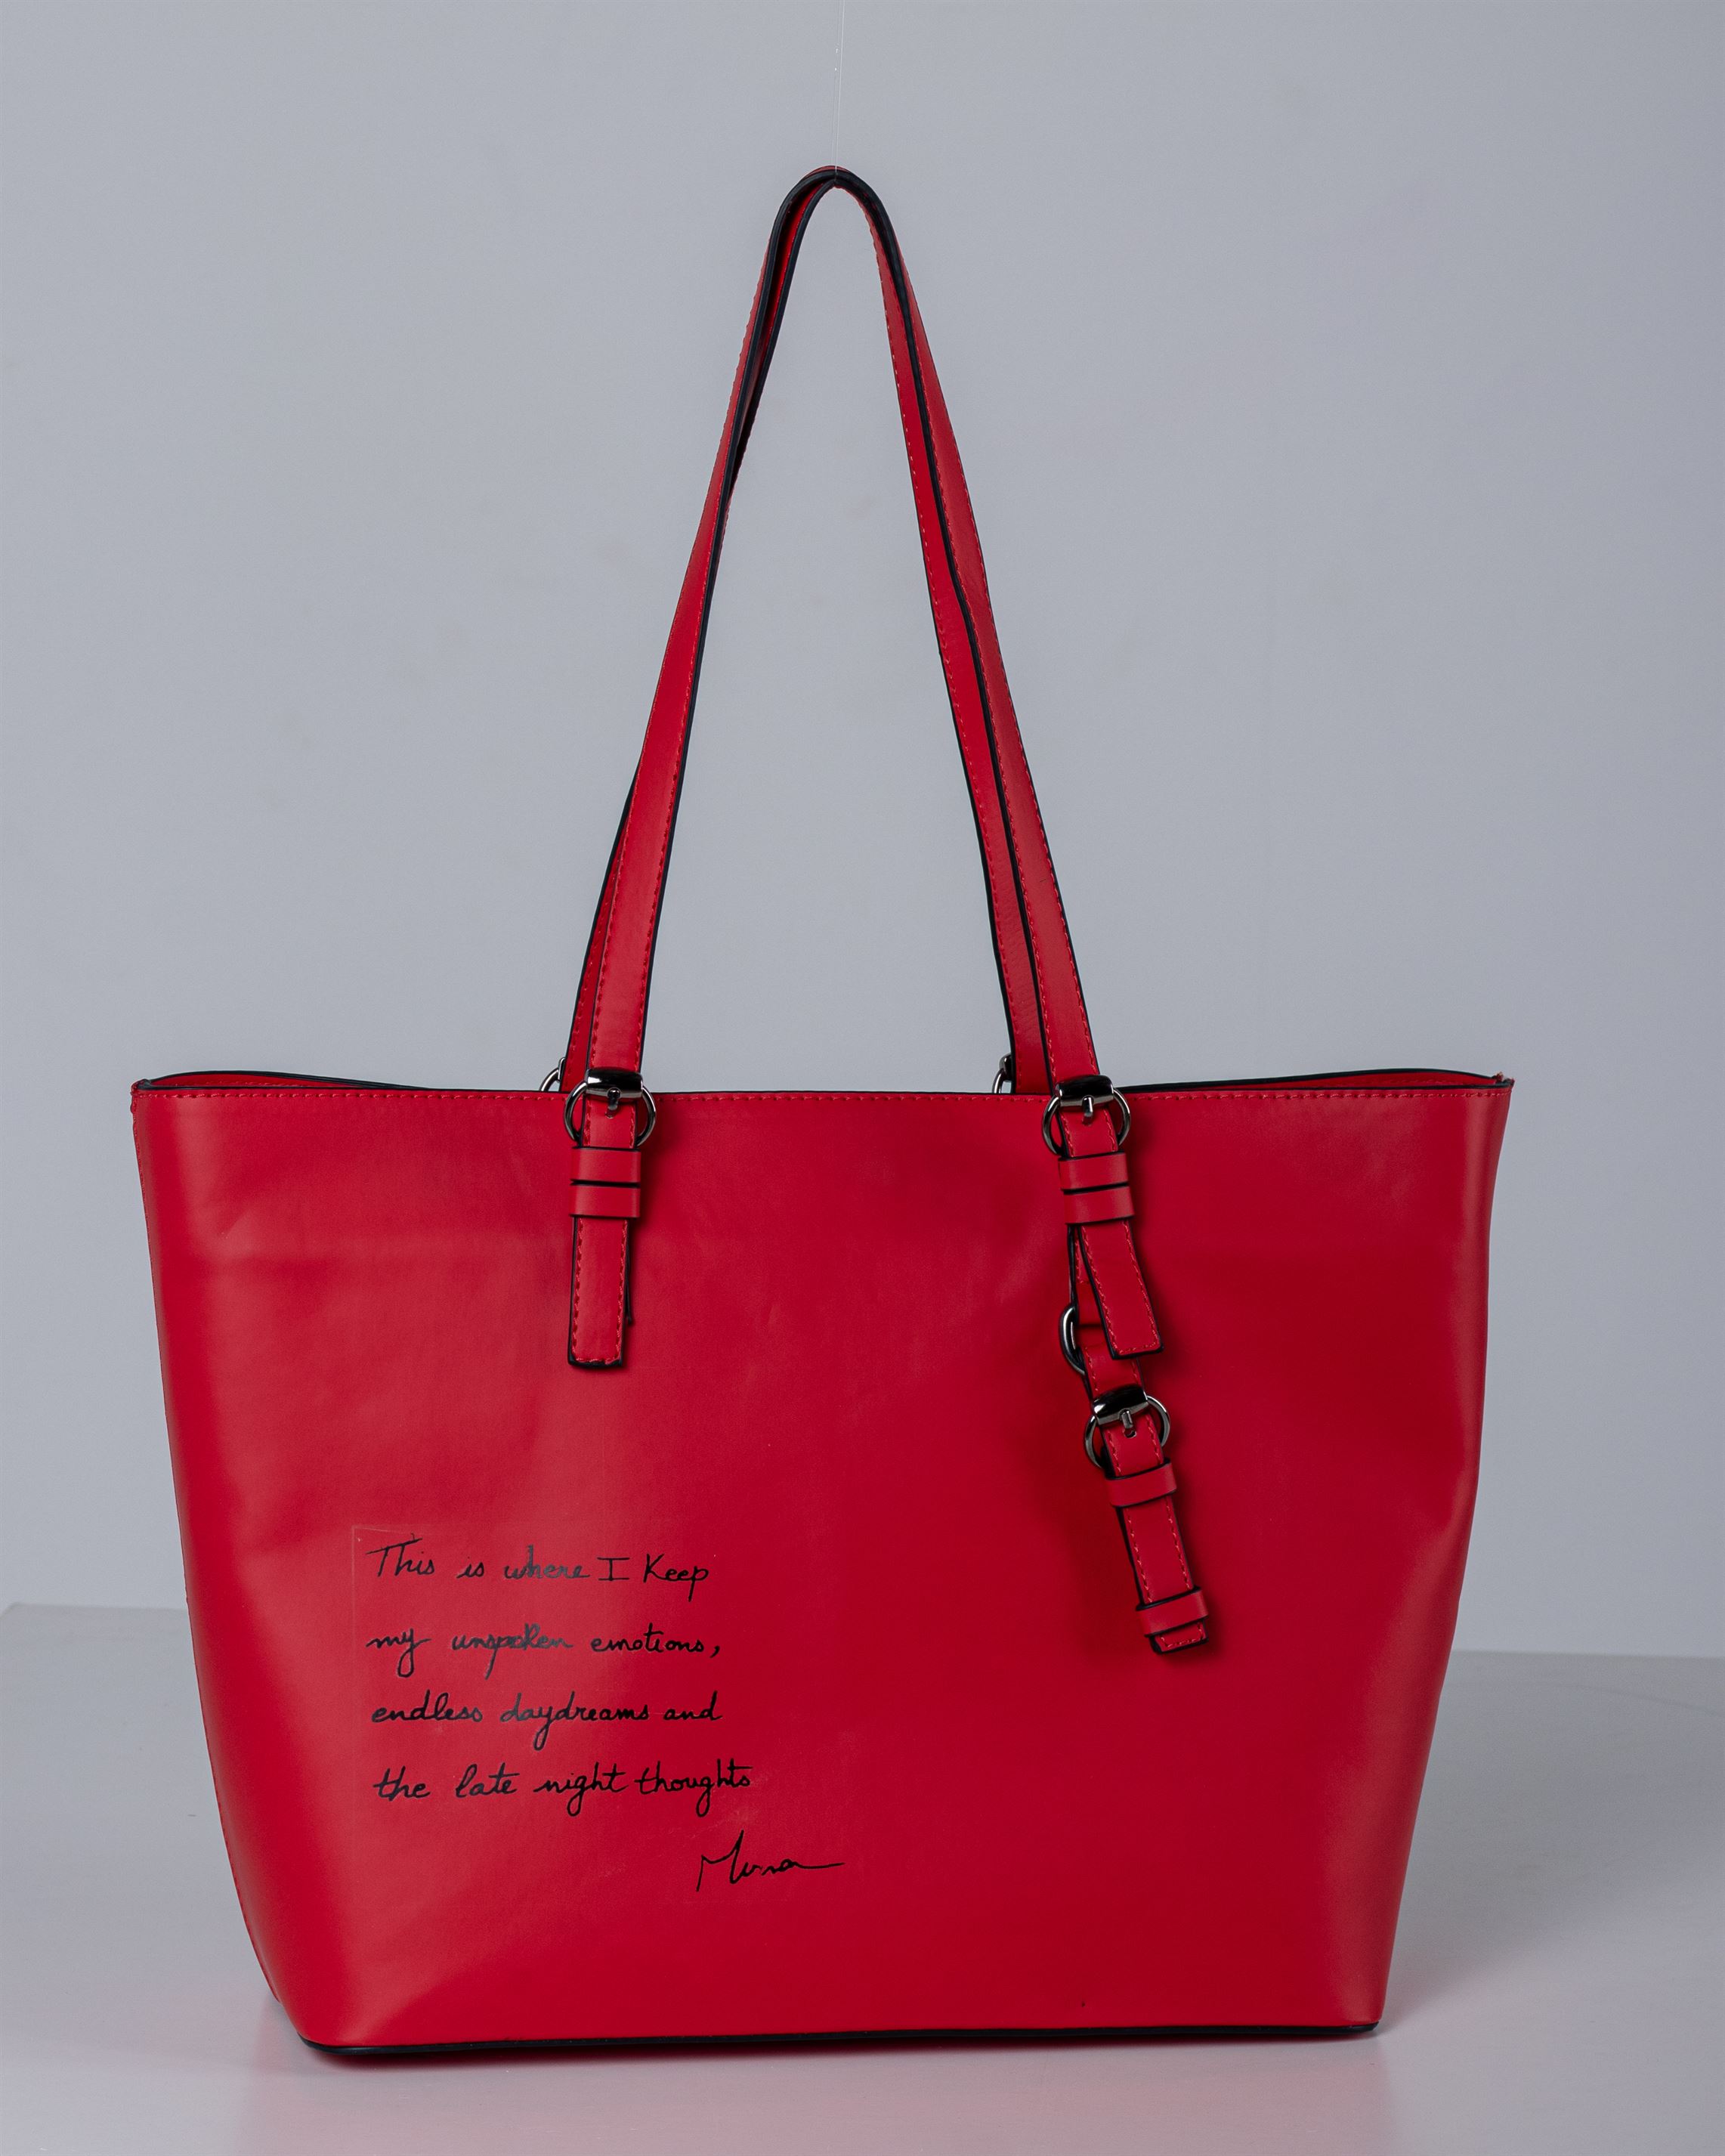 The Drop RED - As she says Tote bag